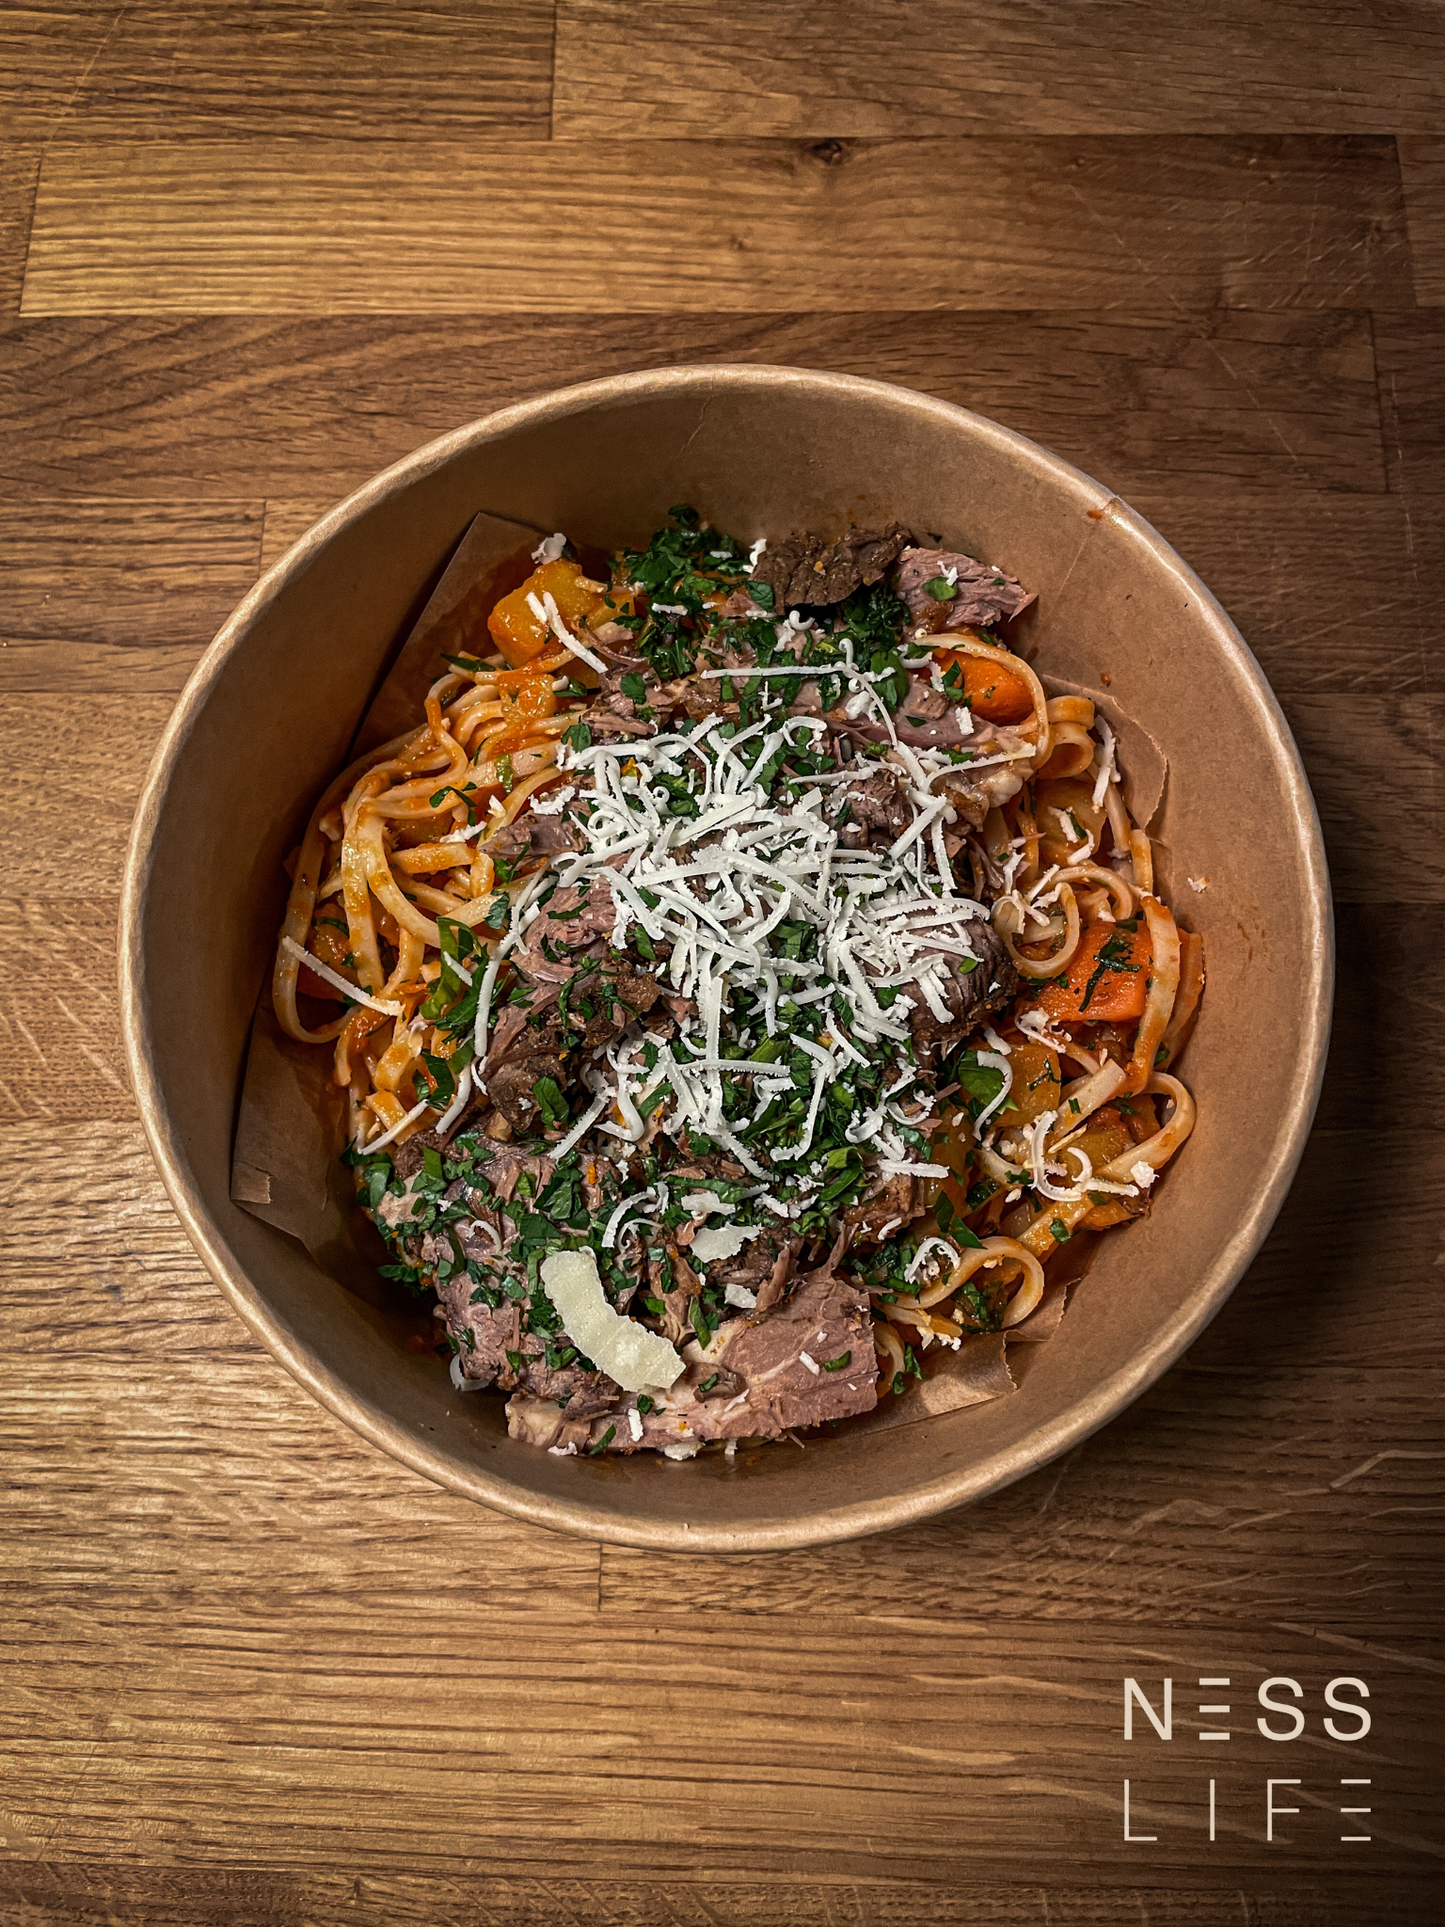 19. Hearty Beef with Gluten-free Pasta